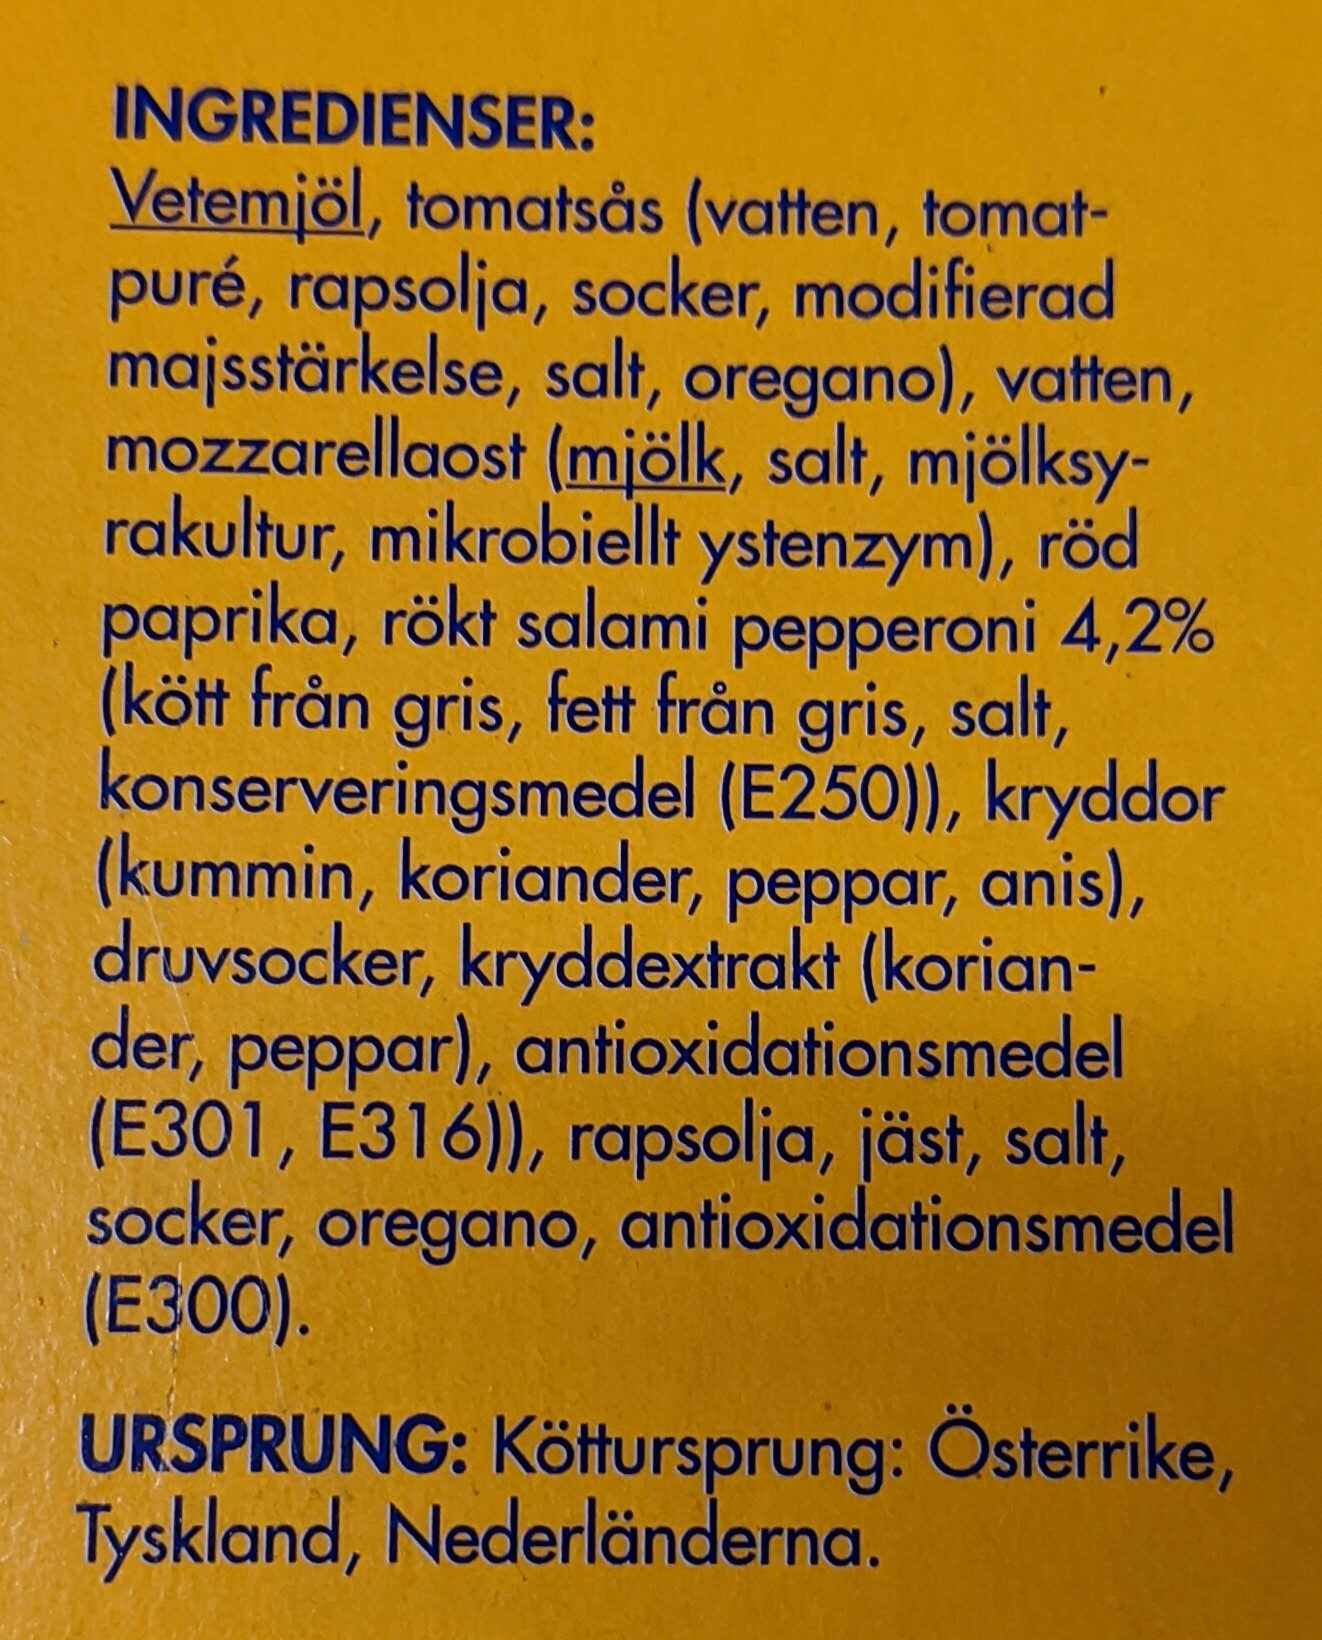 Pizza Salami - Djupfryst - Recycling instructions and/or packaging information